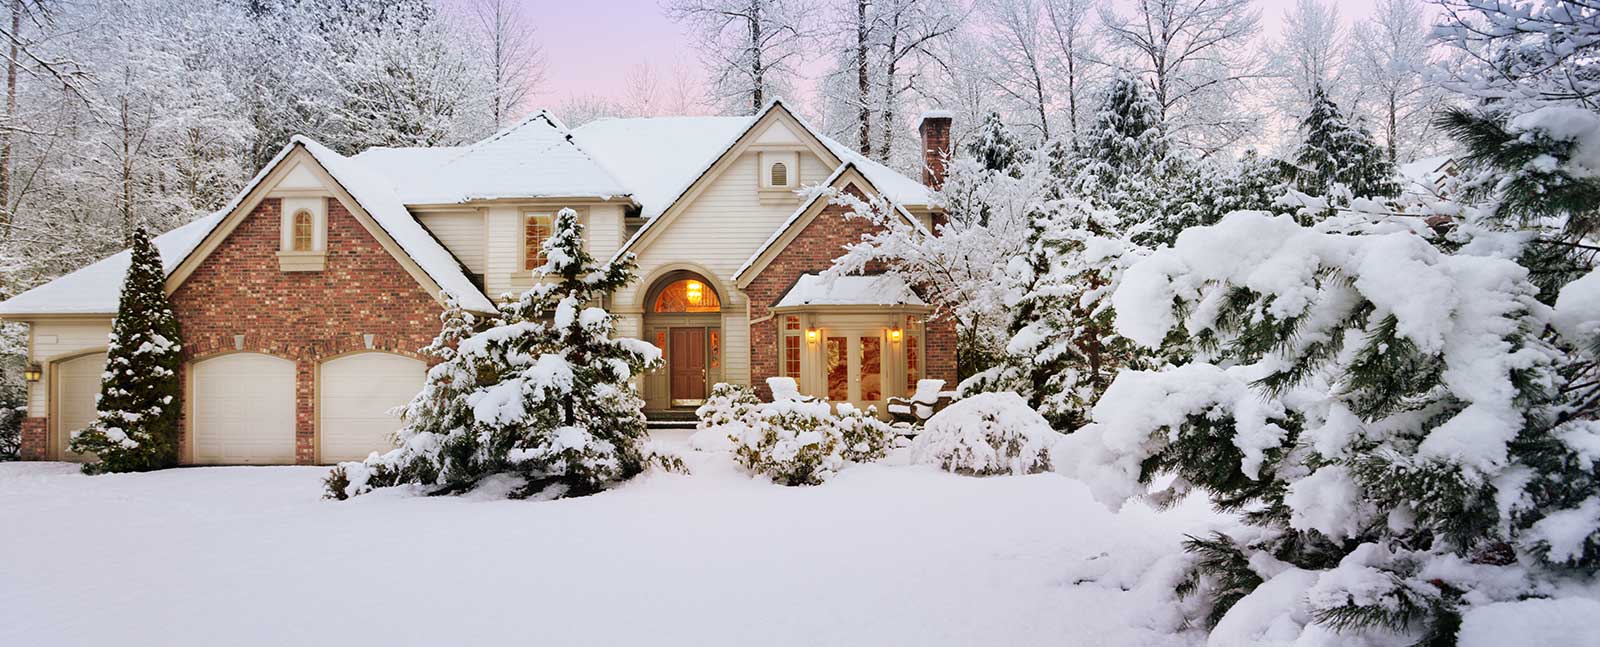 Image of a house in the snow on PSA Financial's website